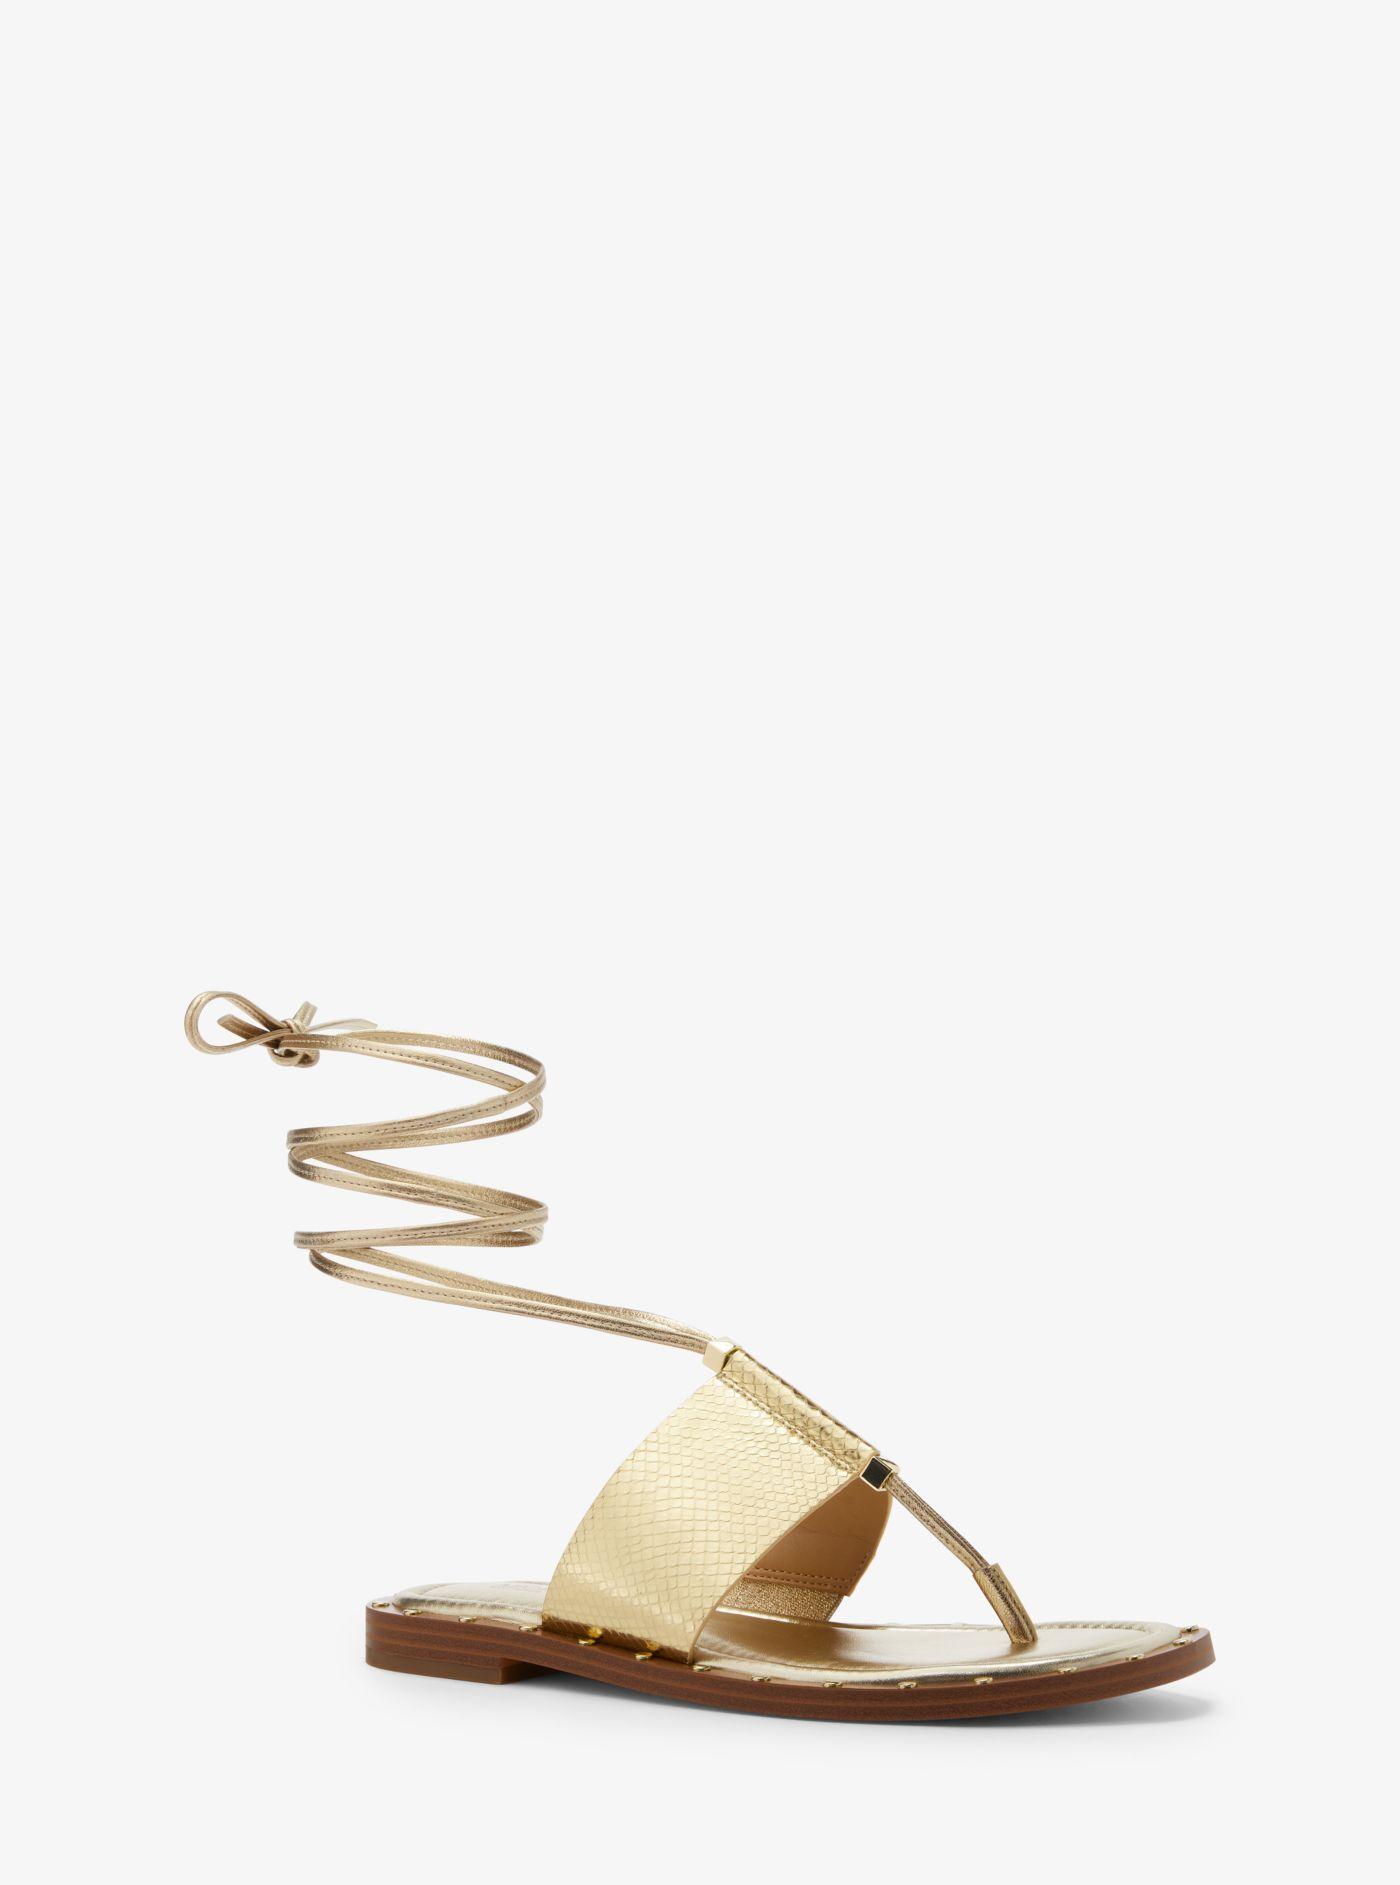 Michael Kors Jagger Metallic Snake Embossed Leather Lace-up Sandal in  Natural | Lyst